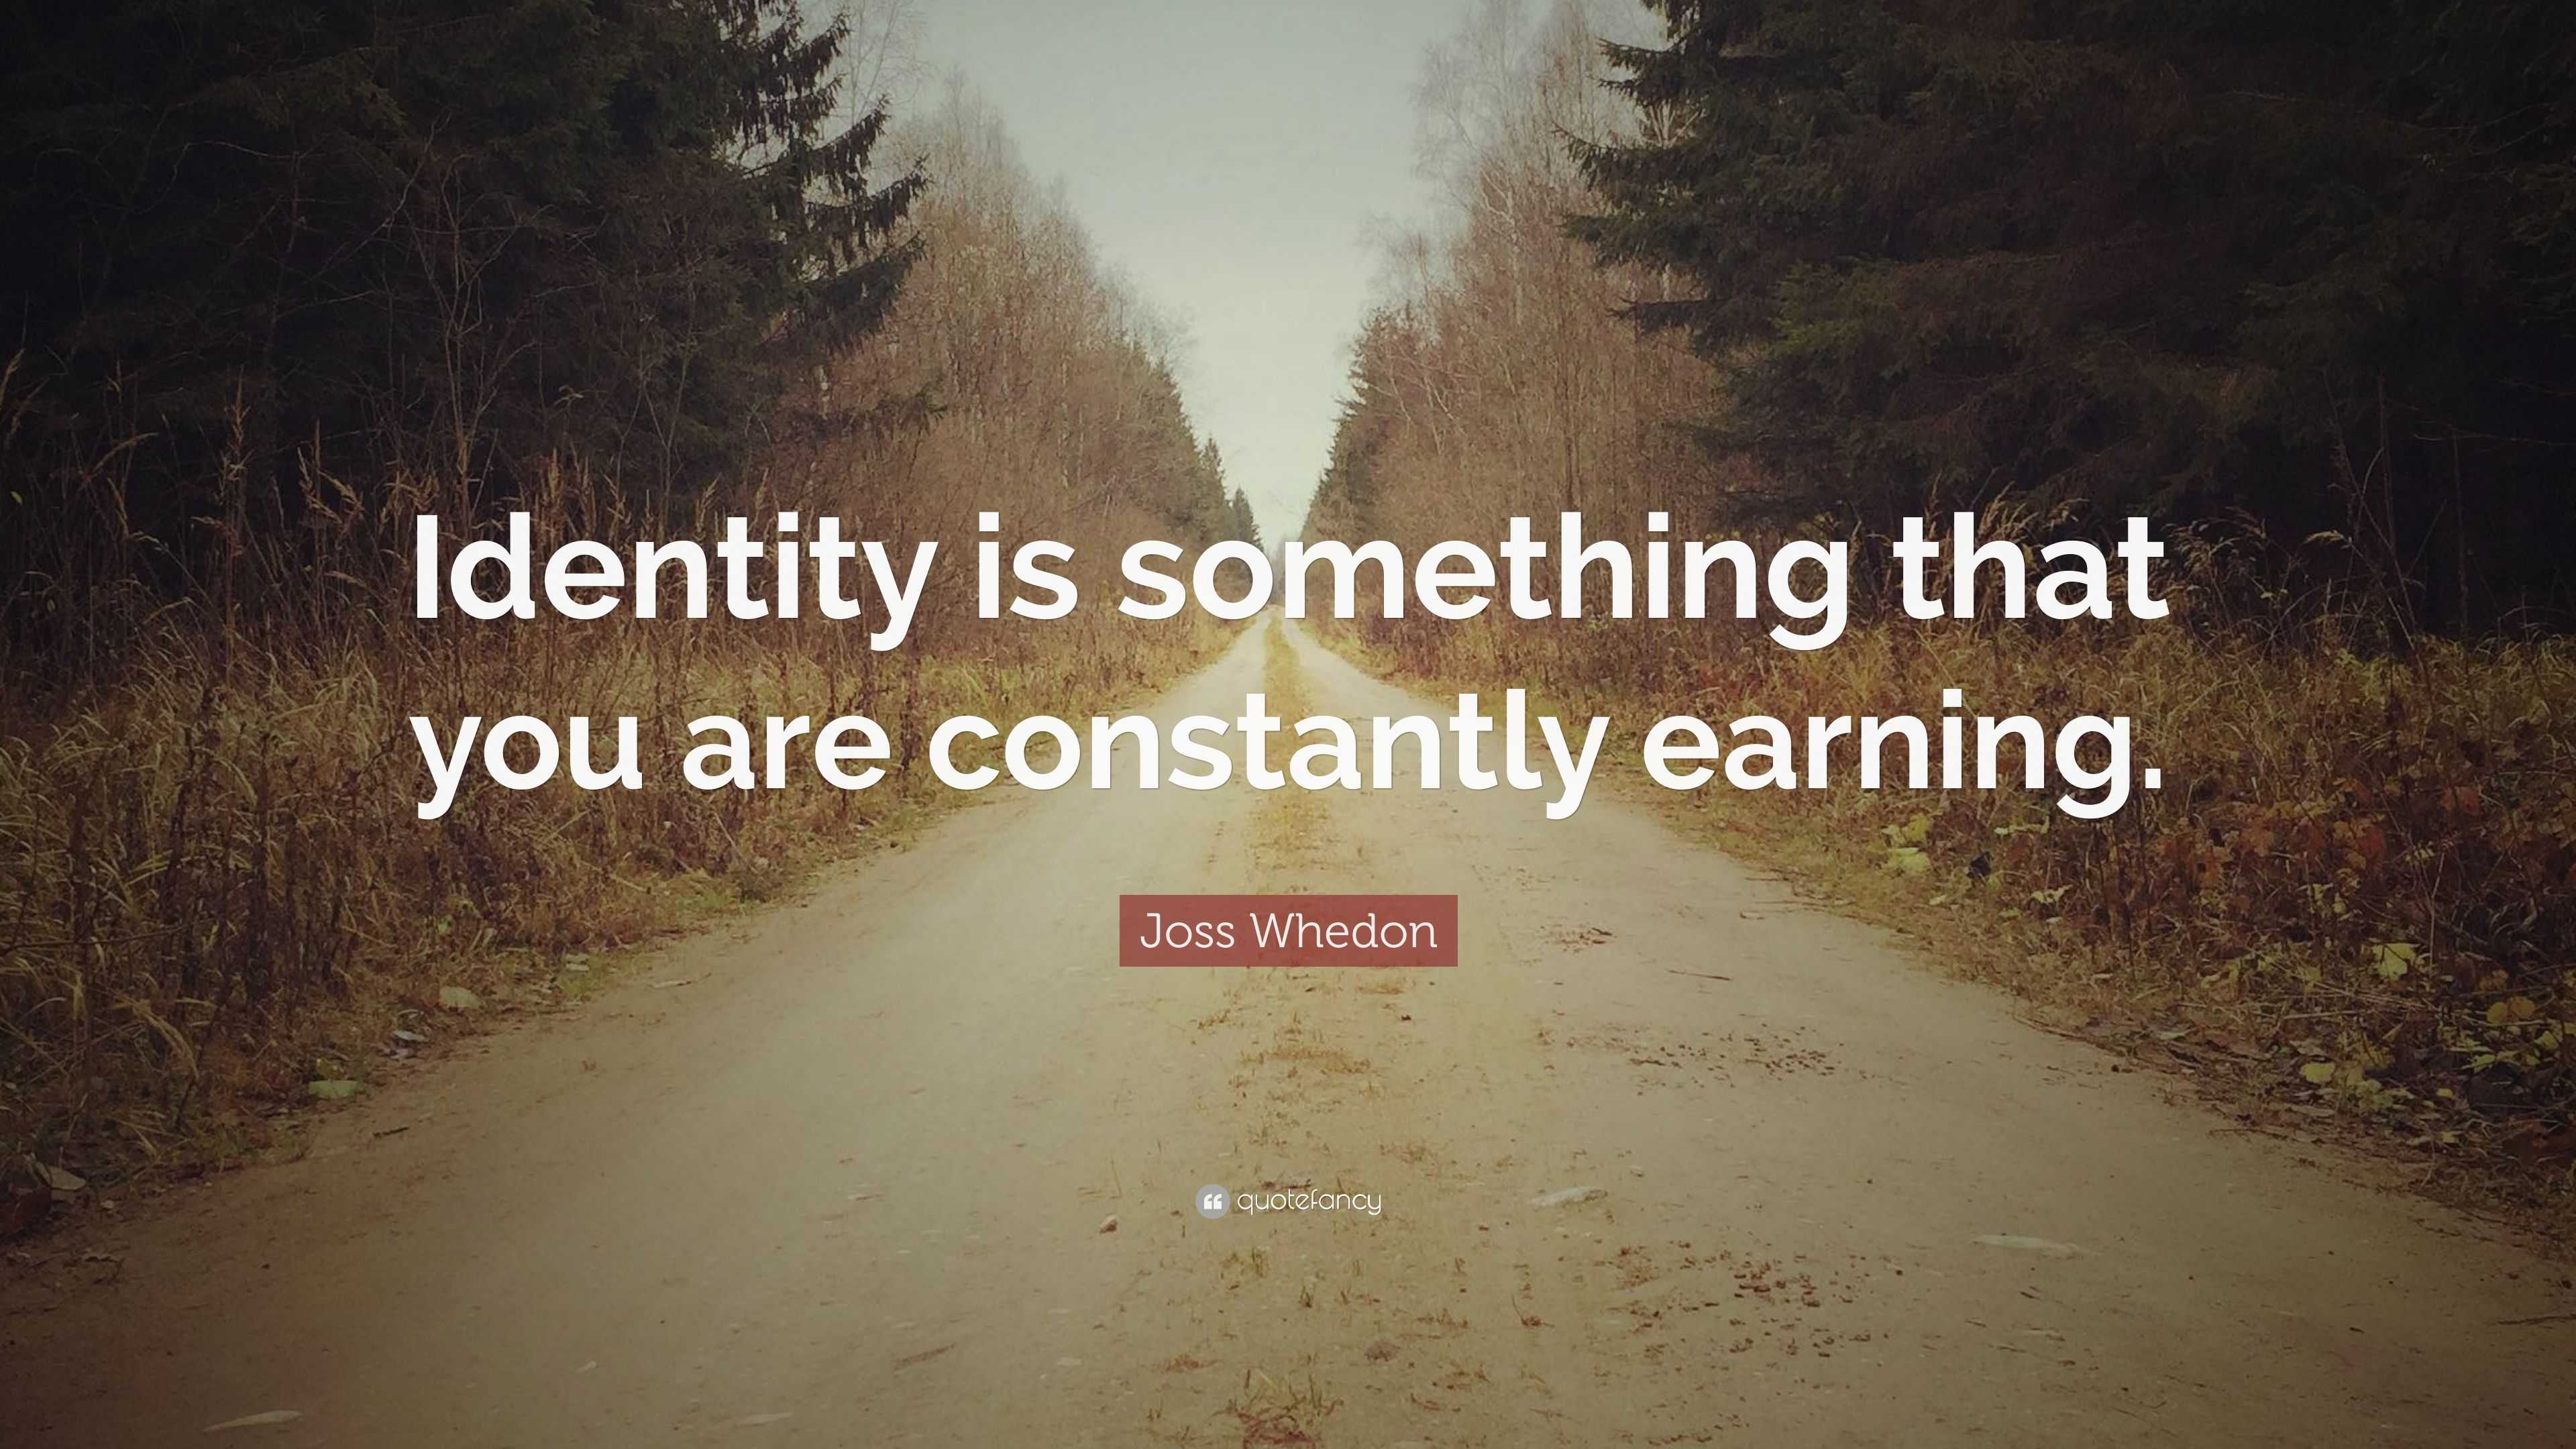 Joss Whedon Quote: “Identity is something that you are constantly